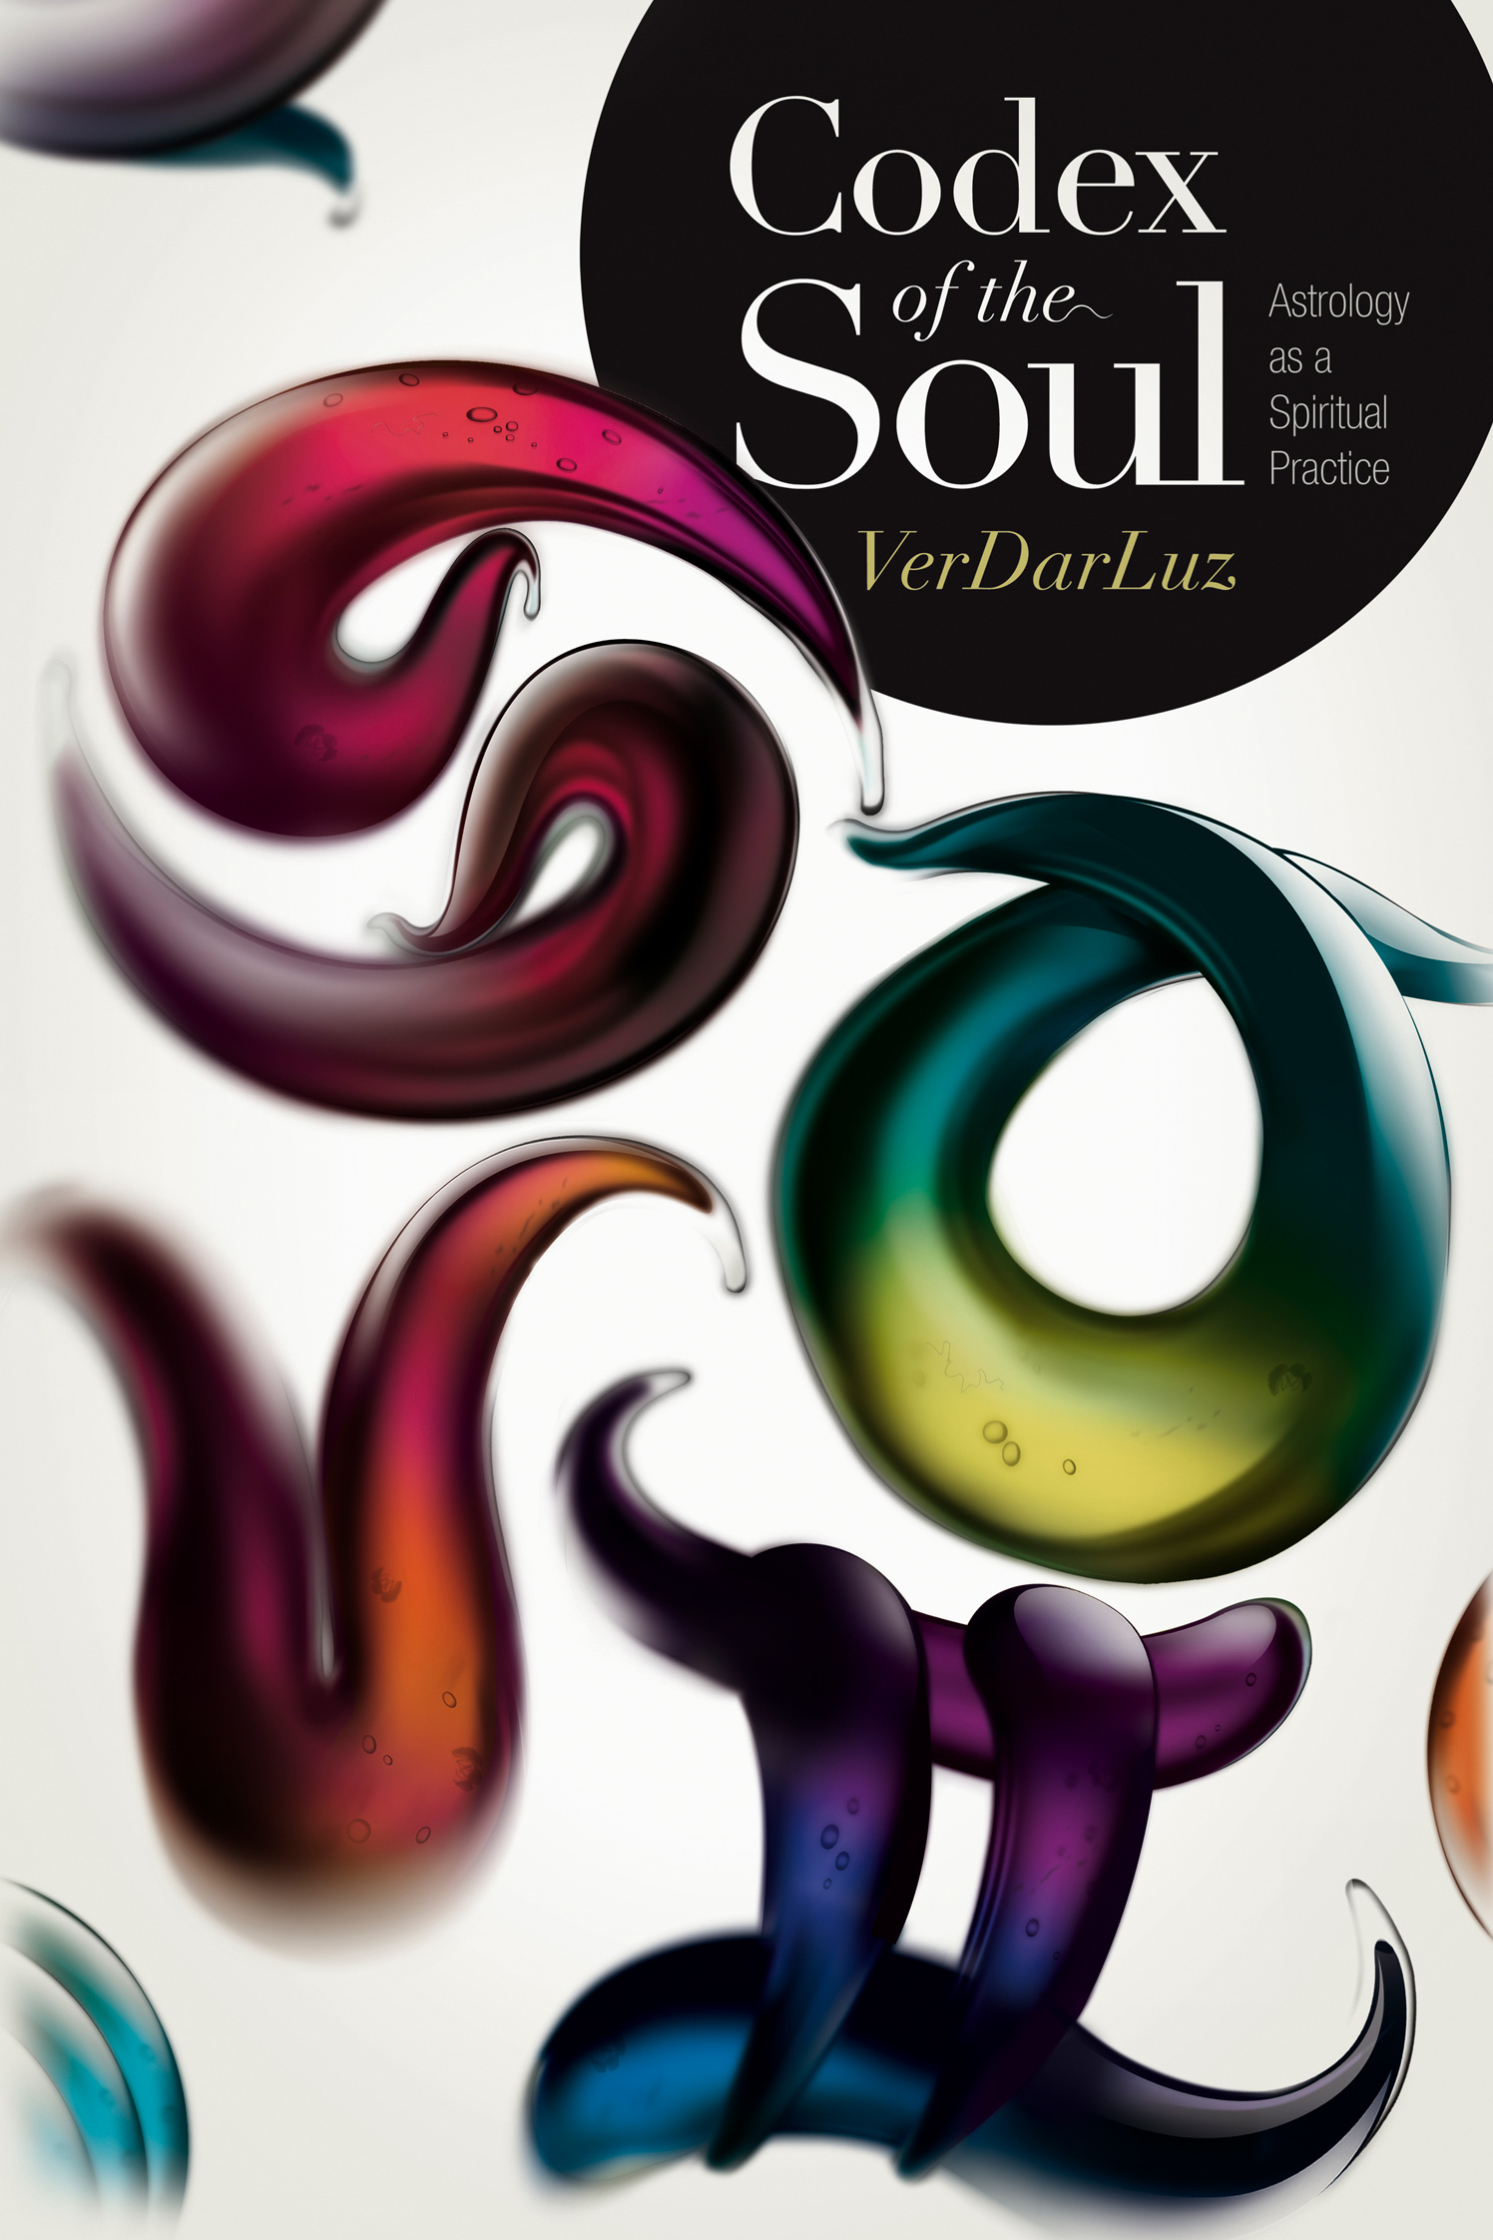 Codex of the Soul